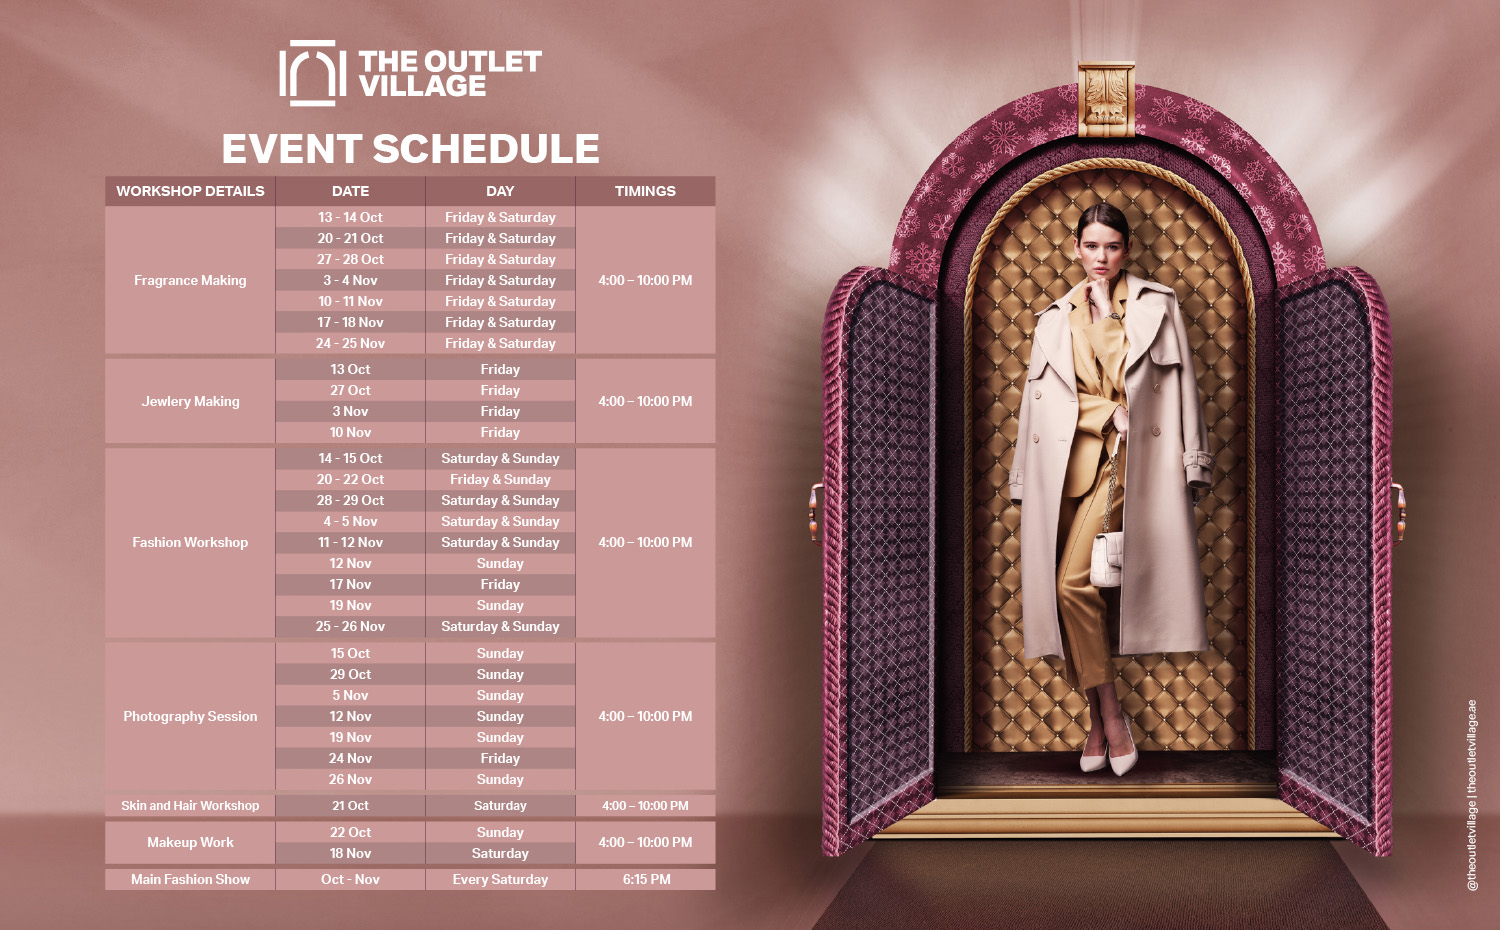 The Outlet Village’s schedule of events includes perfume and jewelry making, fashion workshops, photography, and more